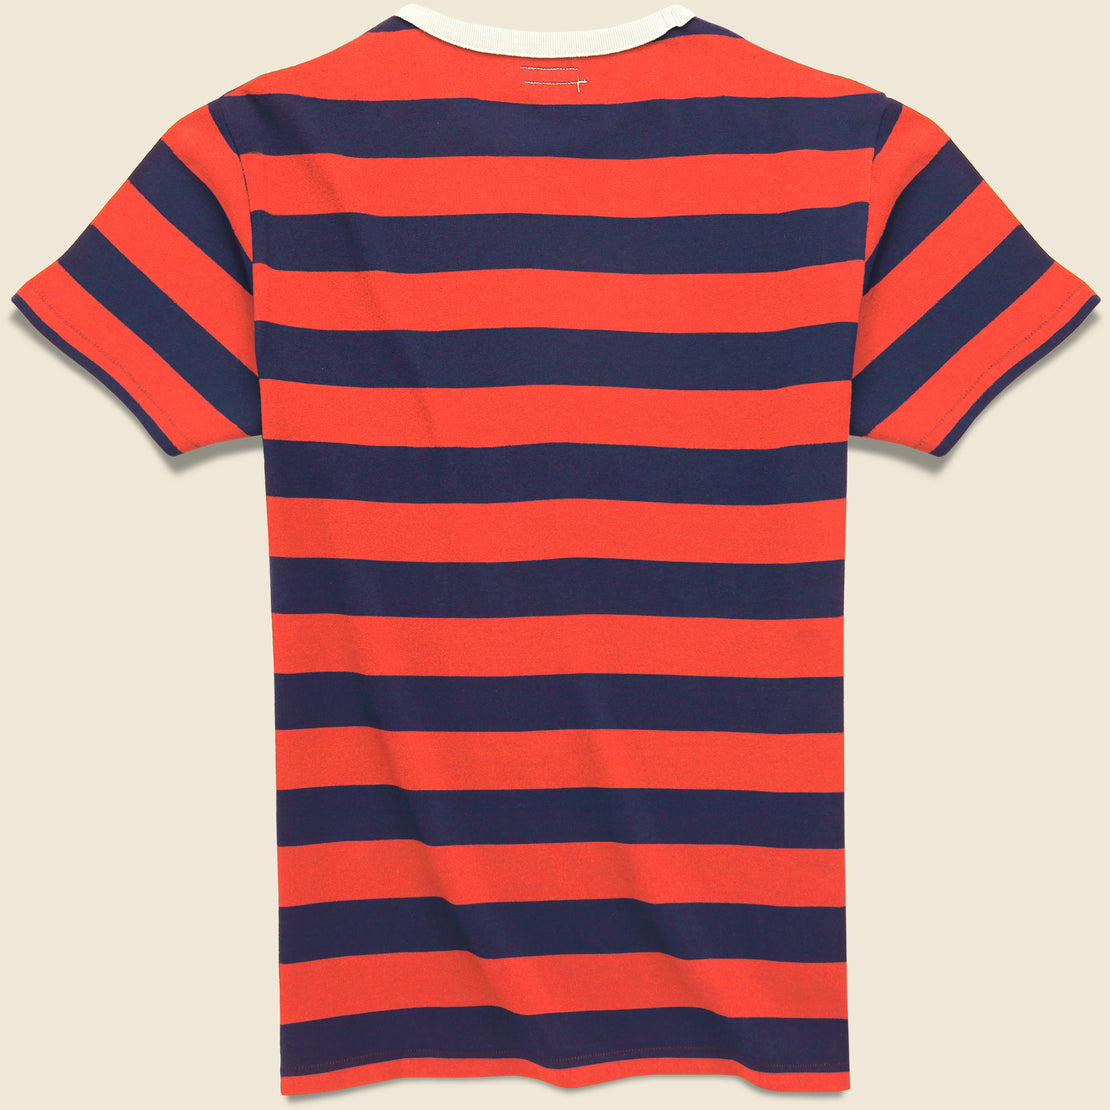 Mojave Striped Tee - Red/Navy - Knickerbocker - STAG Provisions - Tops - S/S Tee